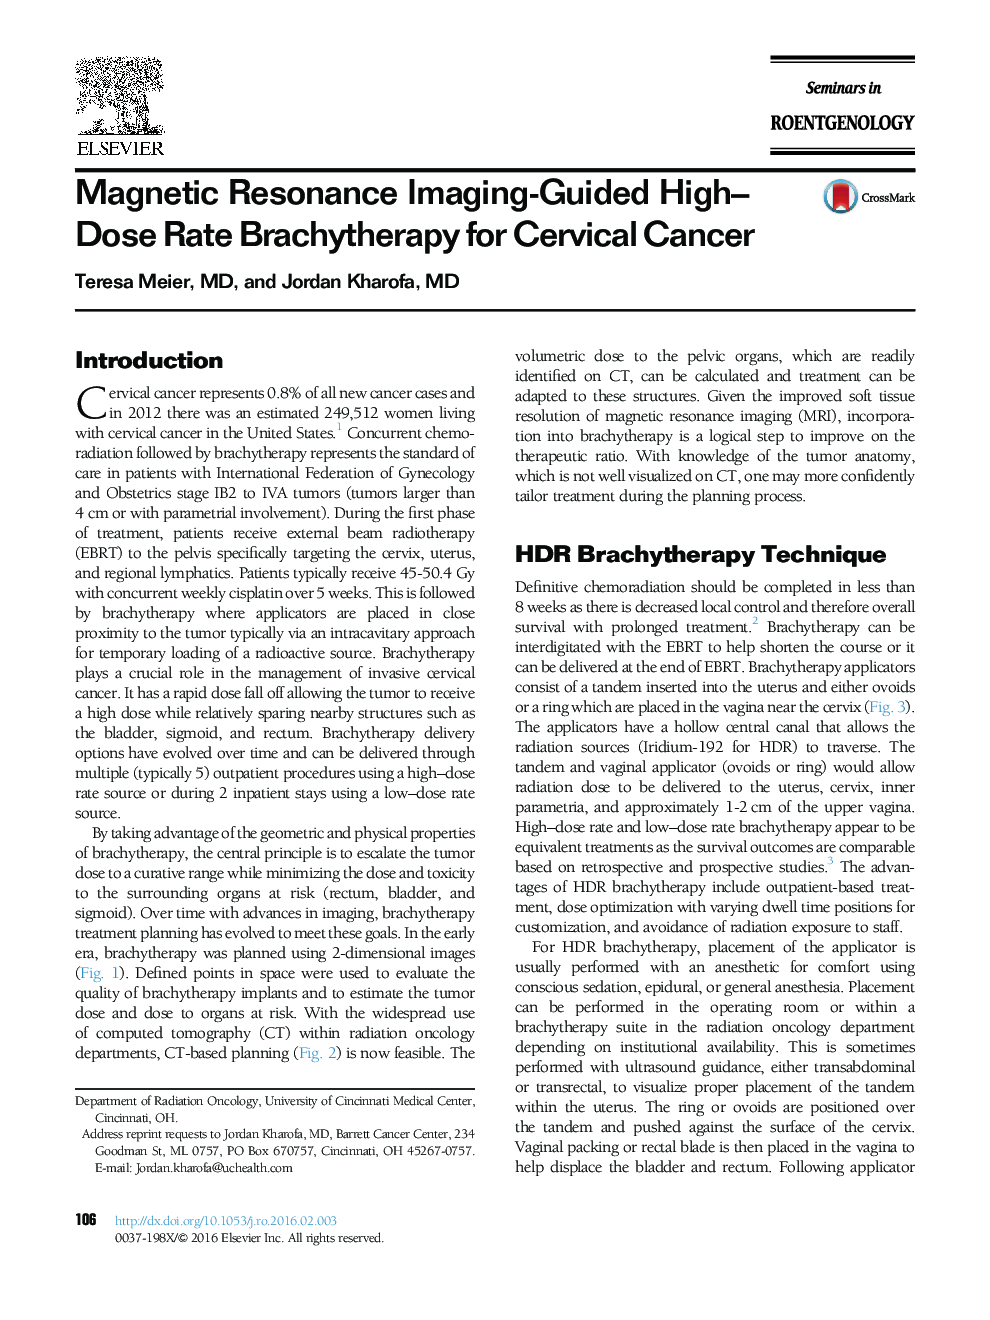 Magnetic Resonance Imaging-Guided High-Dose Rate Brachytherapy for Cervical Cancer